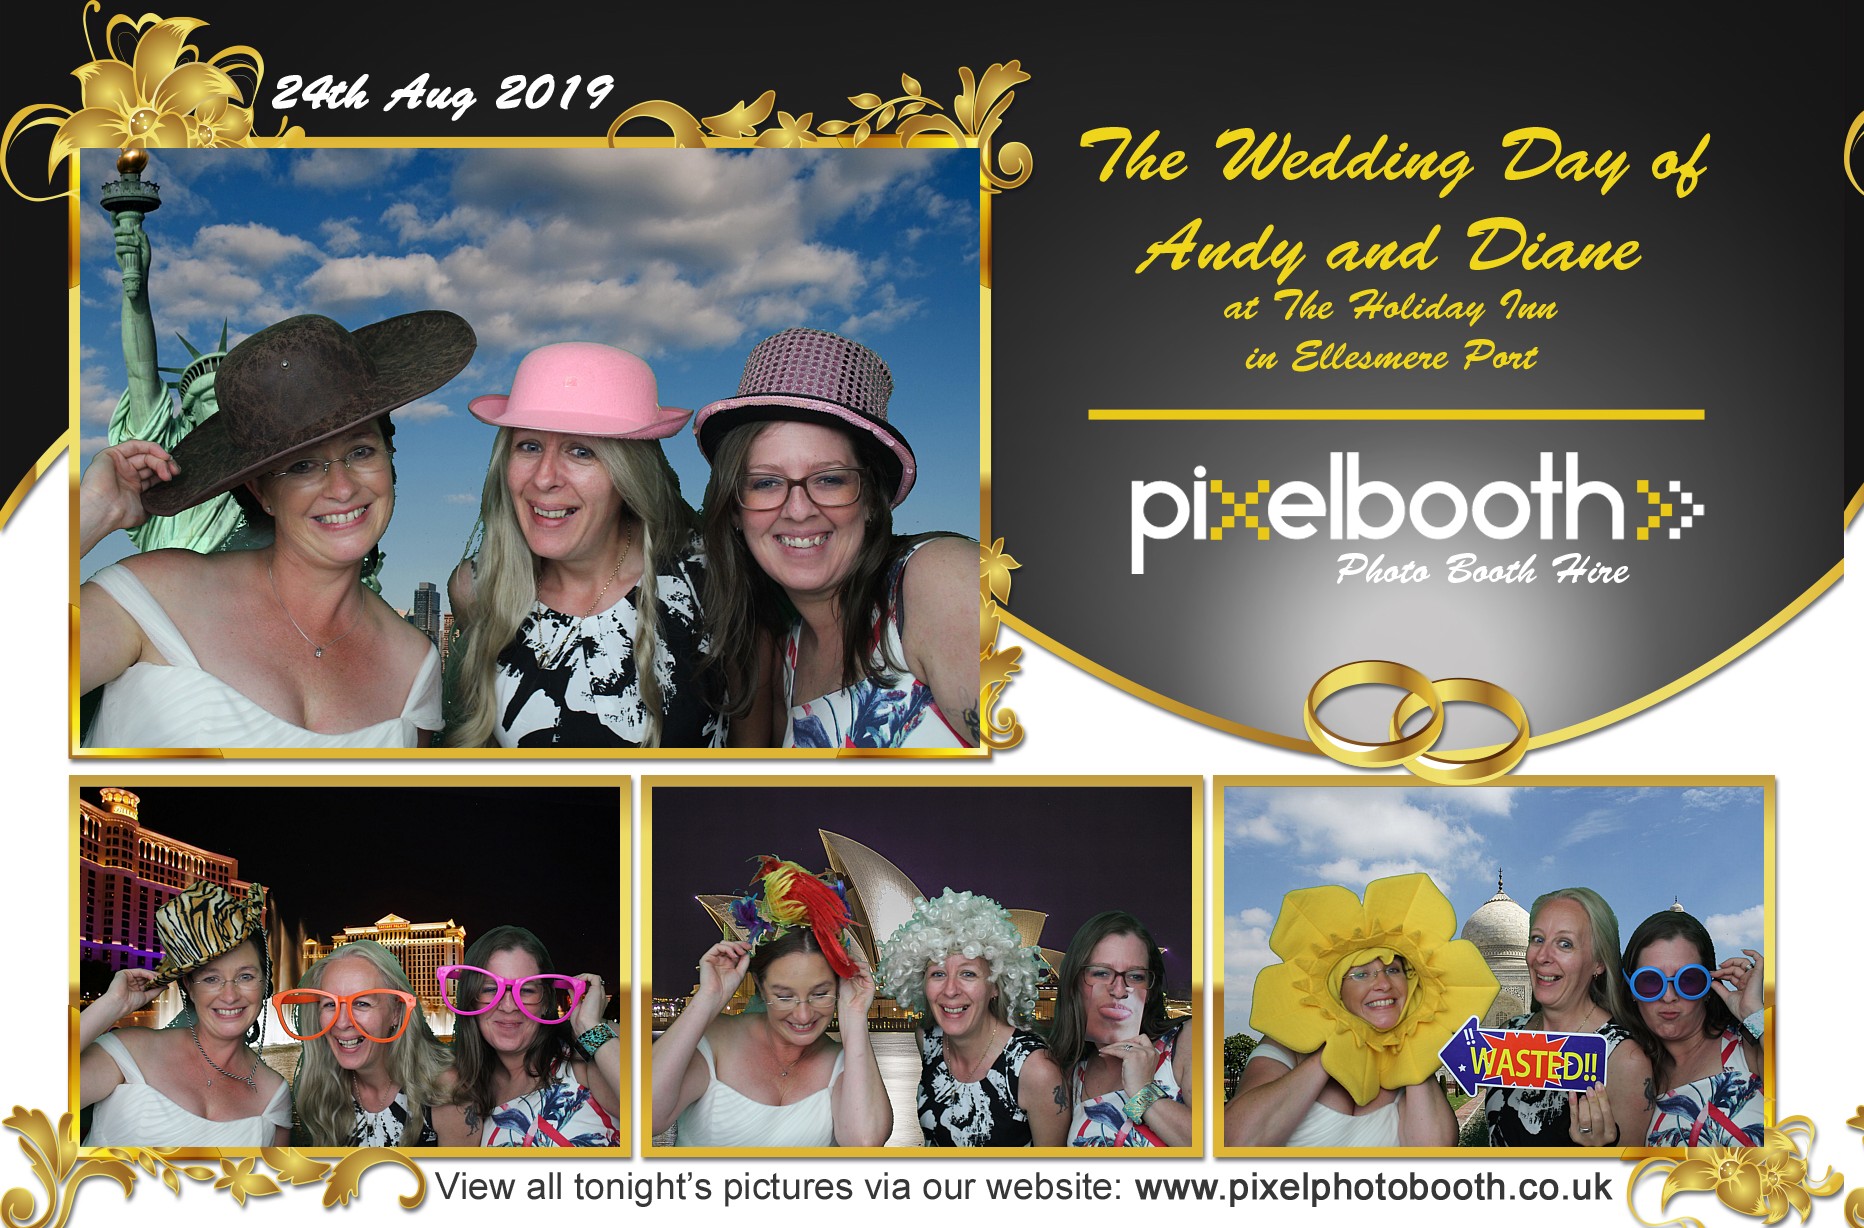 24th Aug 2019: Diane and Andy's Wedding at The Holiday Inn